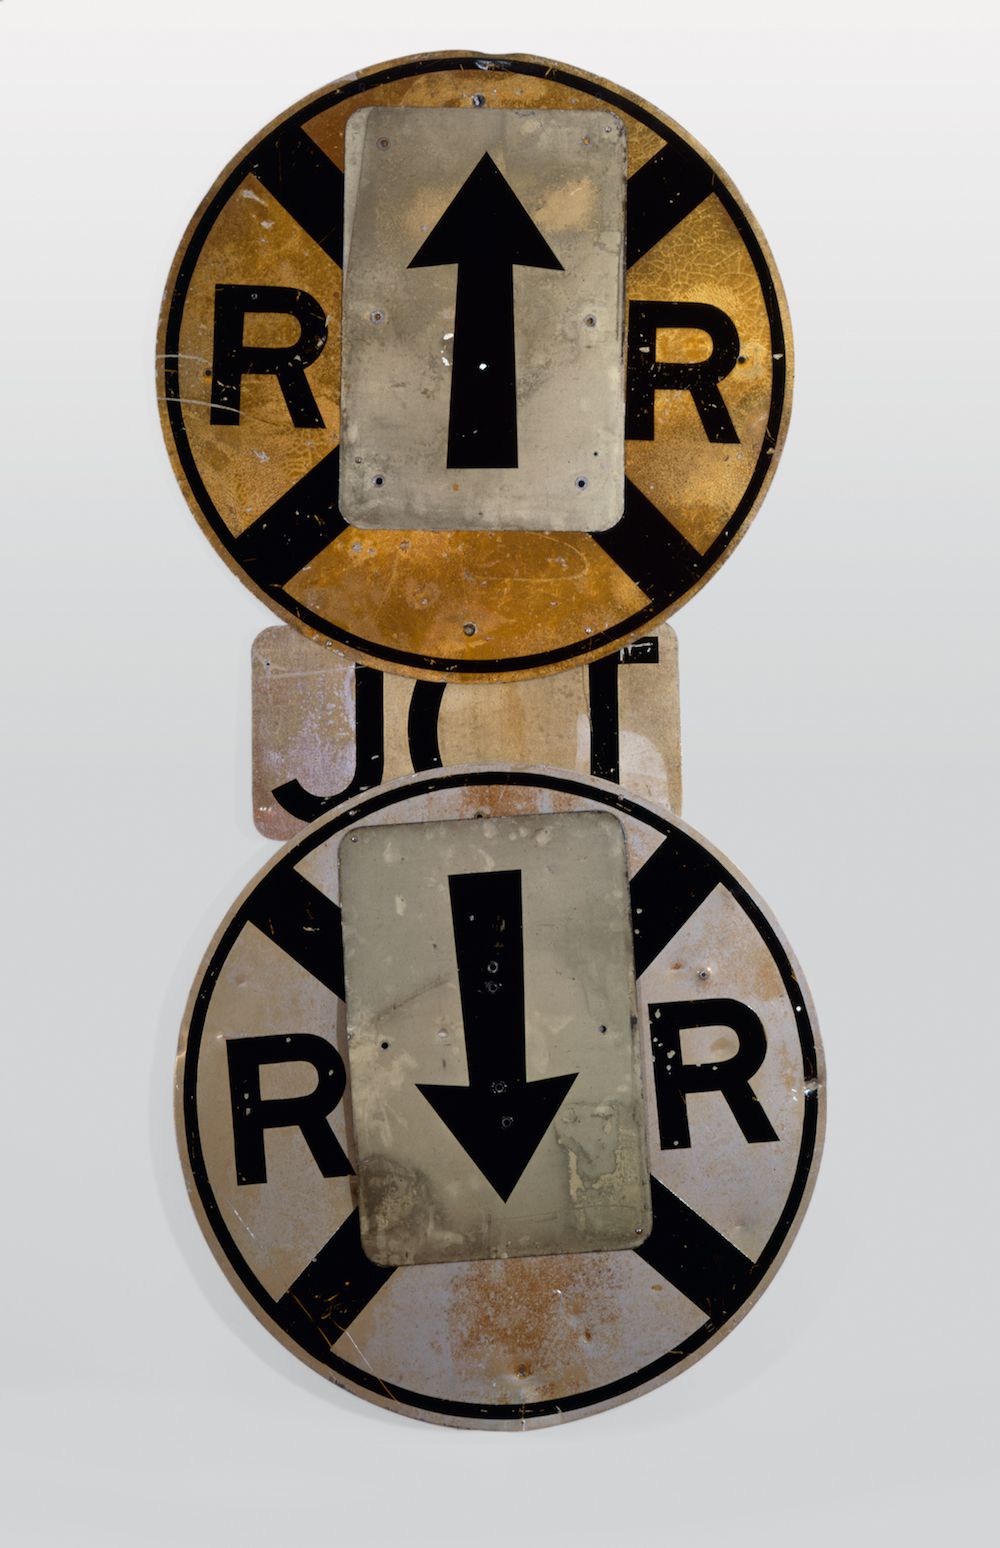 Robert Rauschenberg. Polar Glut. 1987. Riveted metal street signs, 6 ft. 4 1/2 in. × 36 in. × 4 in. (194.3 × 91.4 × 10.2 cm). The Museum of Modern Art, New York. Promised gift of Marie-Josée and Henry R. Kravis. © 2017 Robert Rauschenberg Foundation<br/>